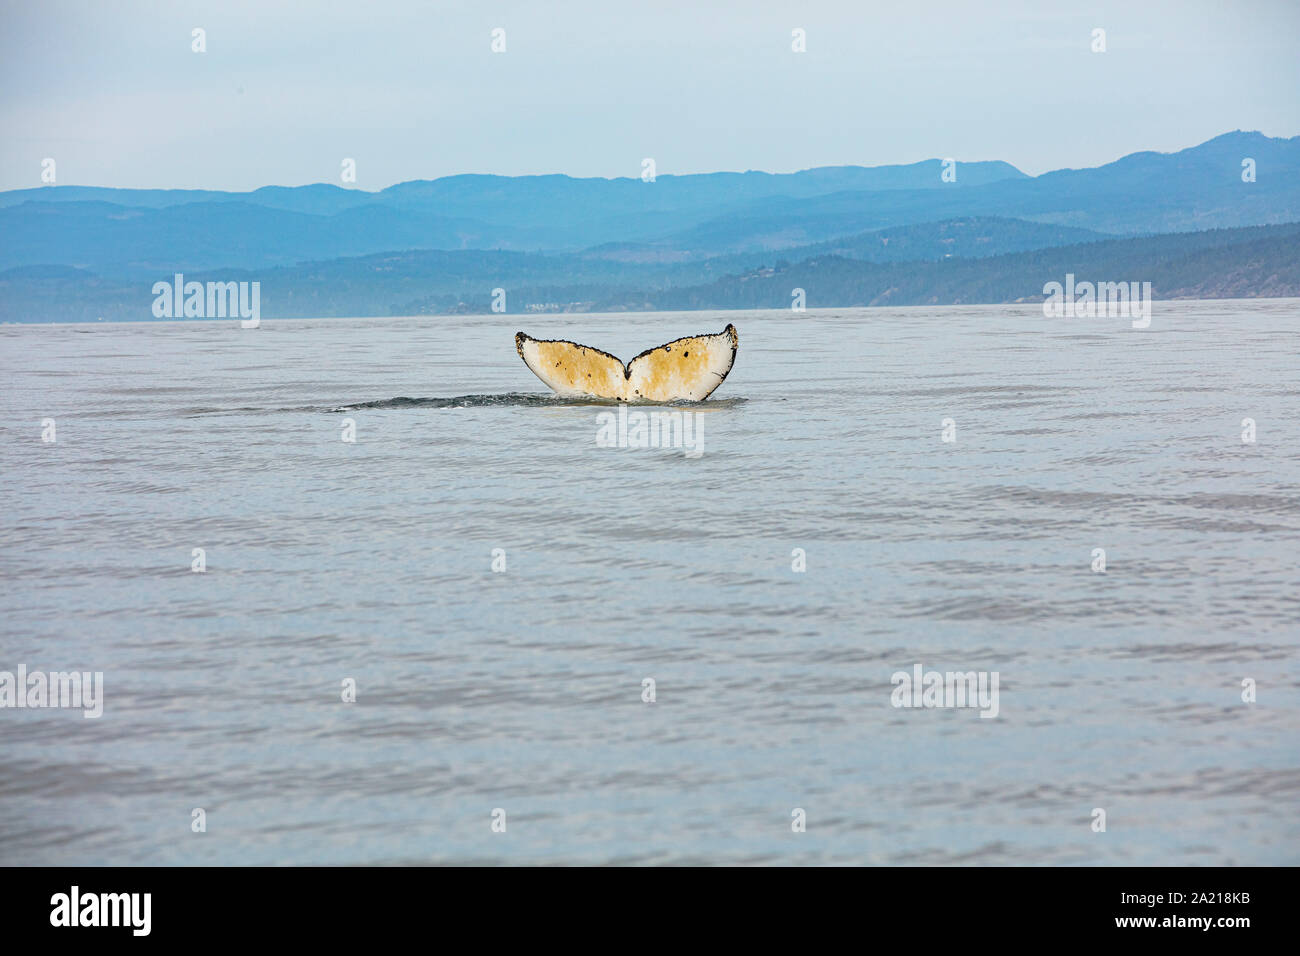 Humpback whale diving Stock Photo